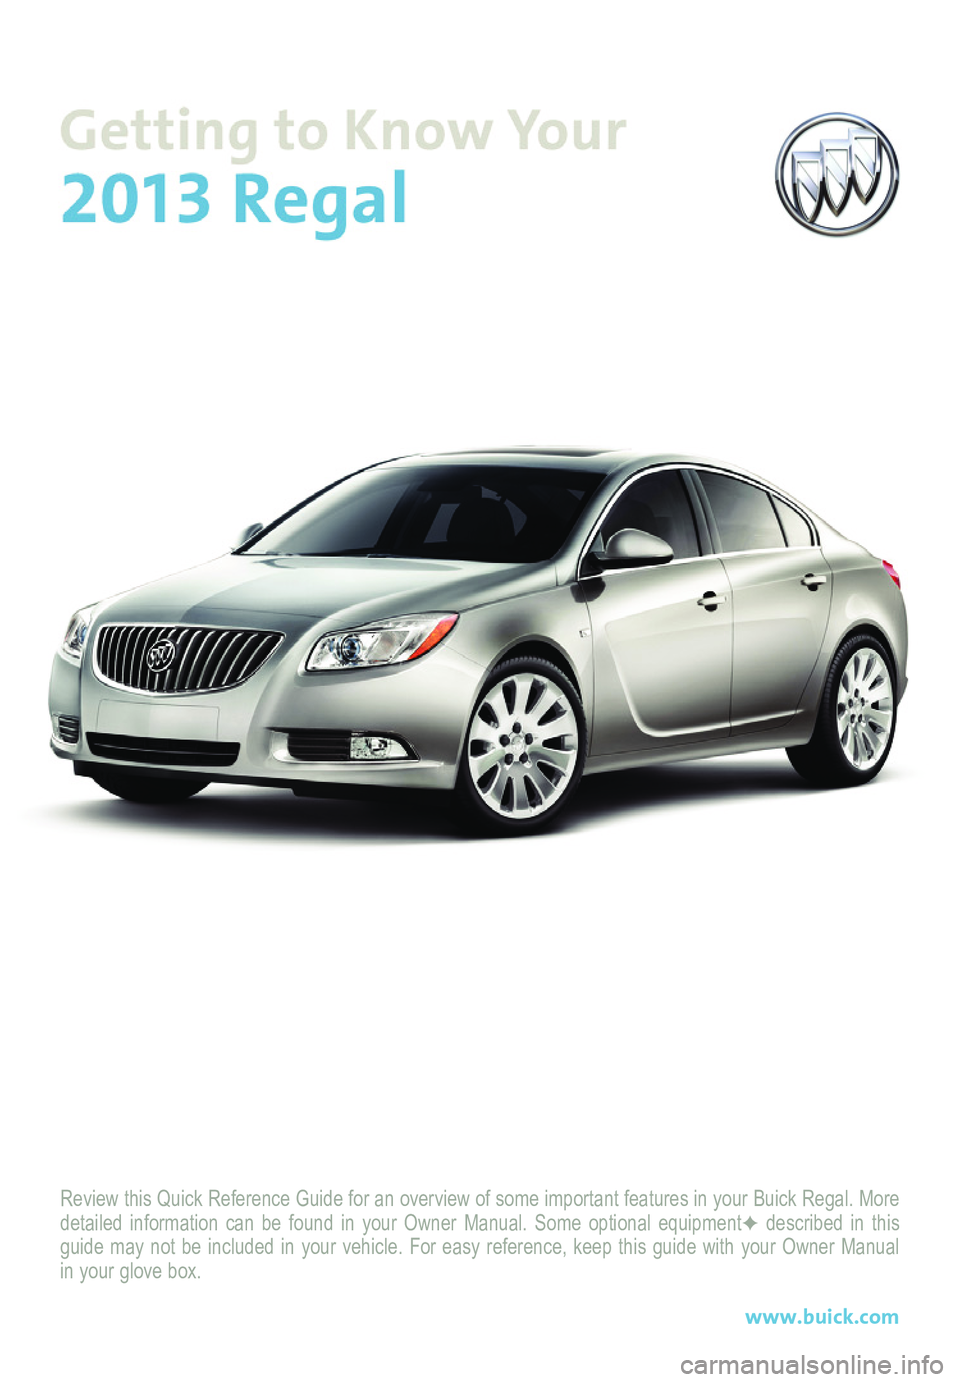 BUICK REGAL 2013  Get To Know Guide Review this Quick Reference Guide for an overview of some important feat\
ures in your Buick Regal. More detailed information can be found in your Owner Manual. Some optional eq\
uipmentF described in